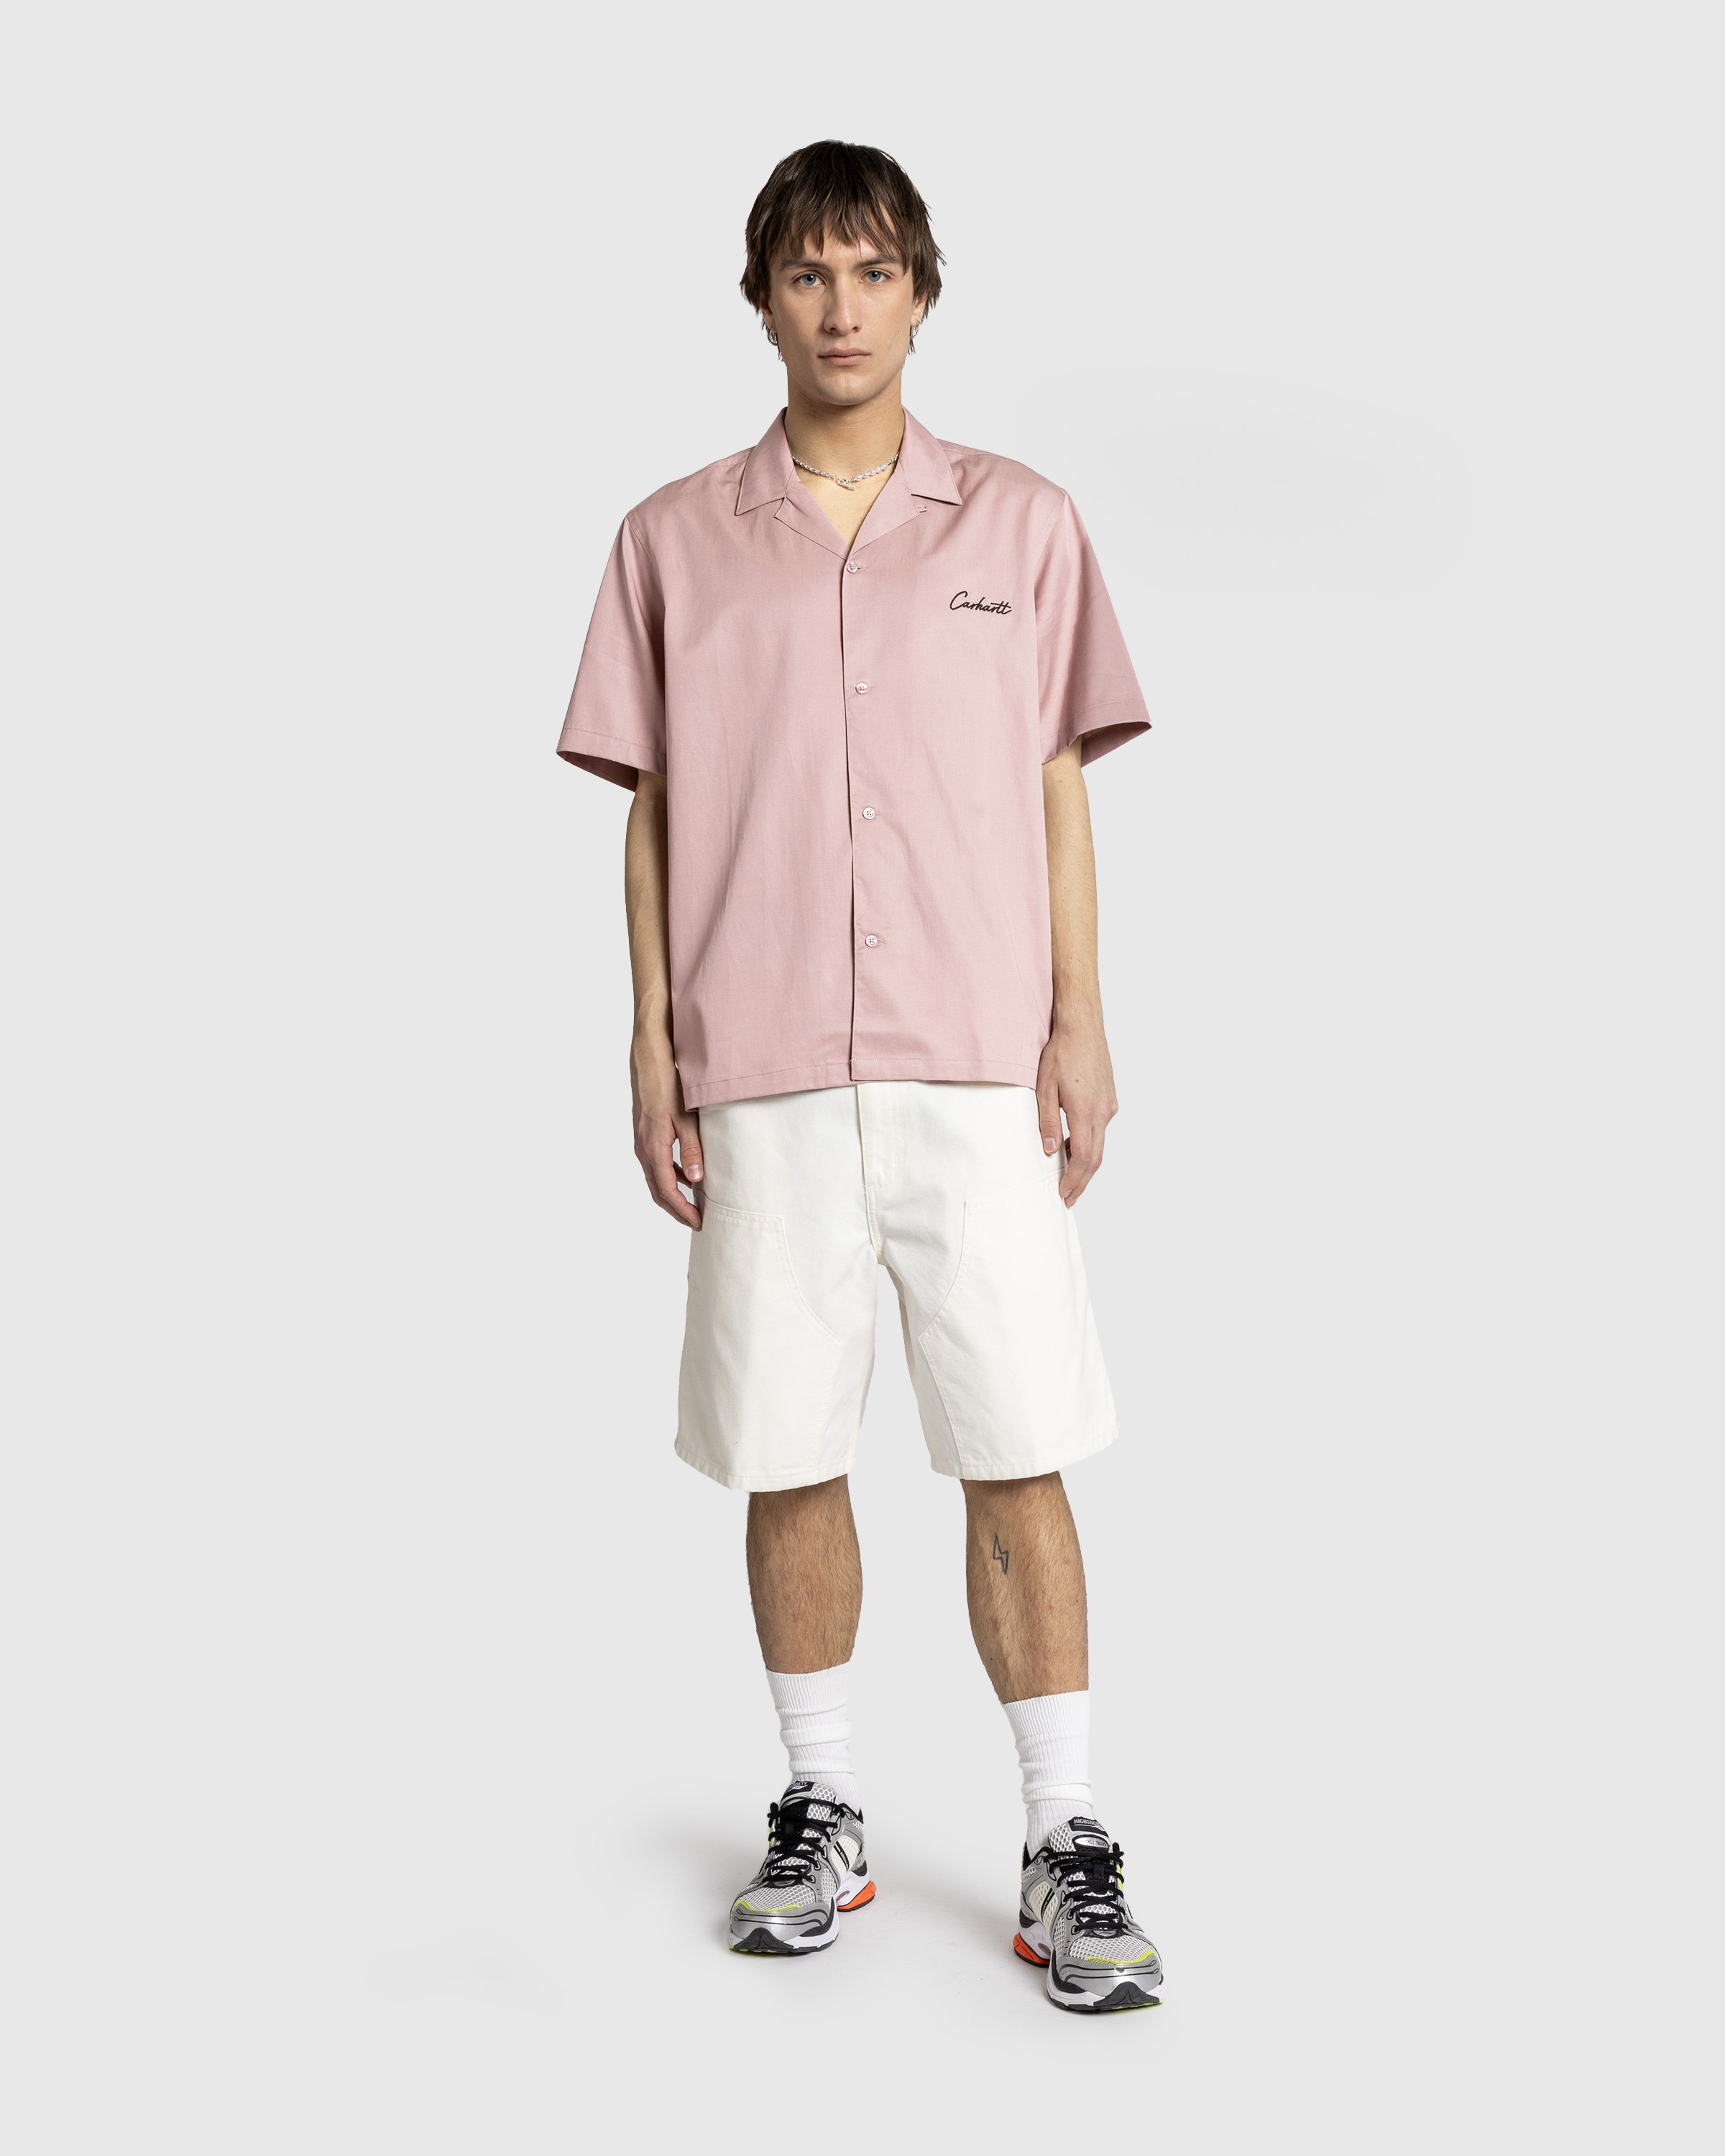 Carhartt WIP - S/S Delray Shirt Glassy Pink / Black - Clothing - Pink - Image 3